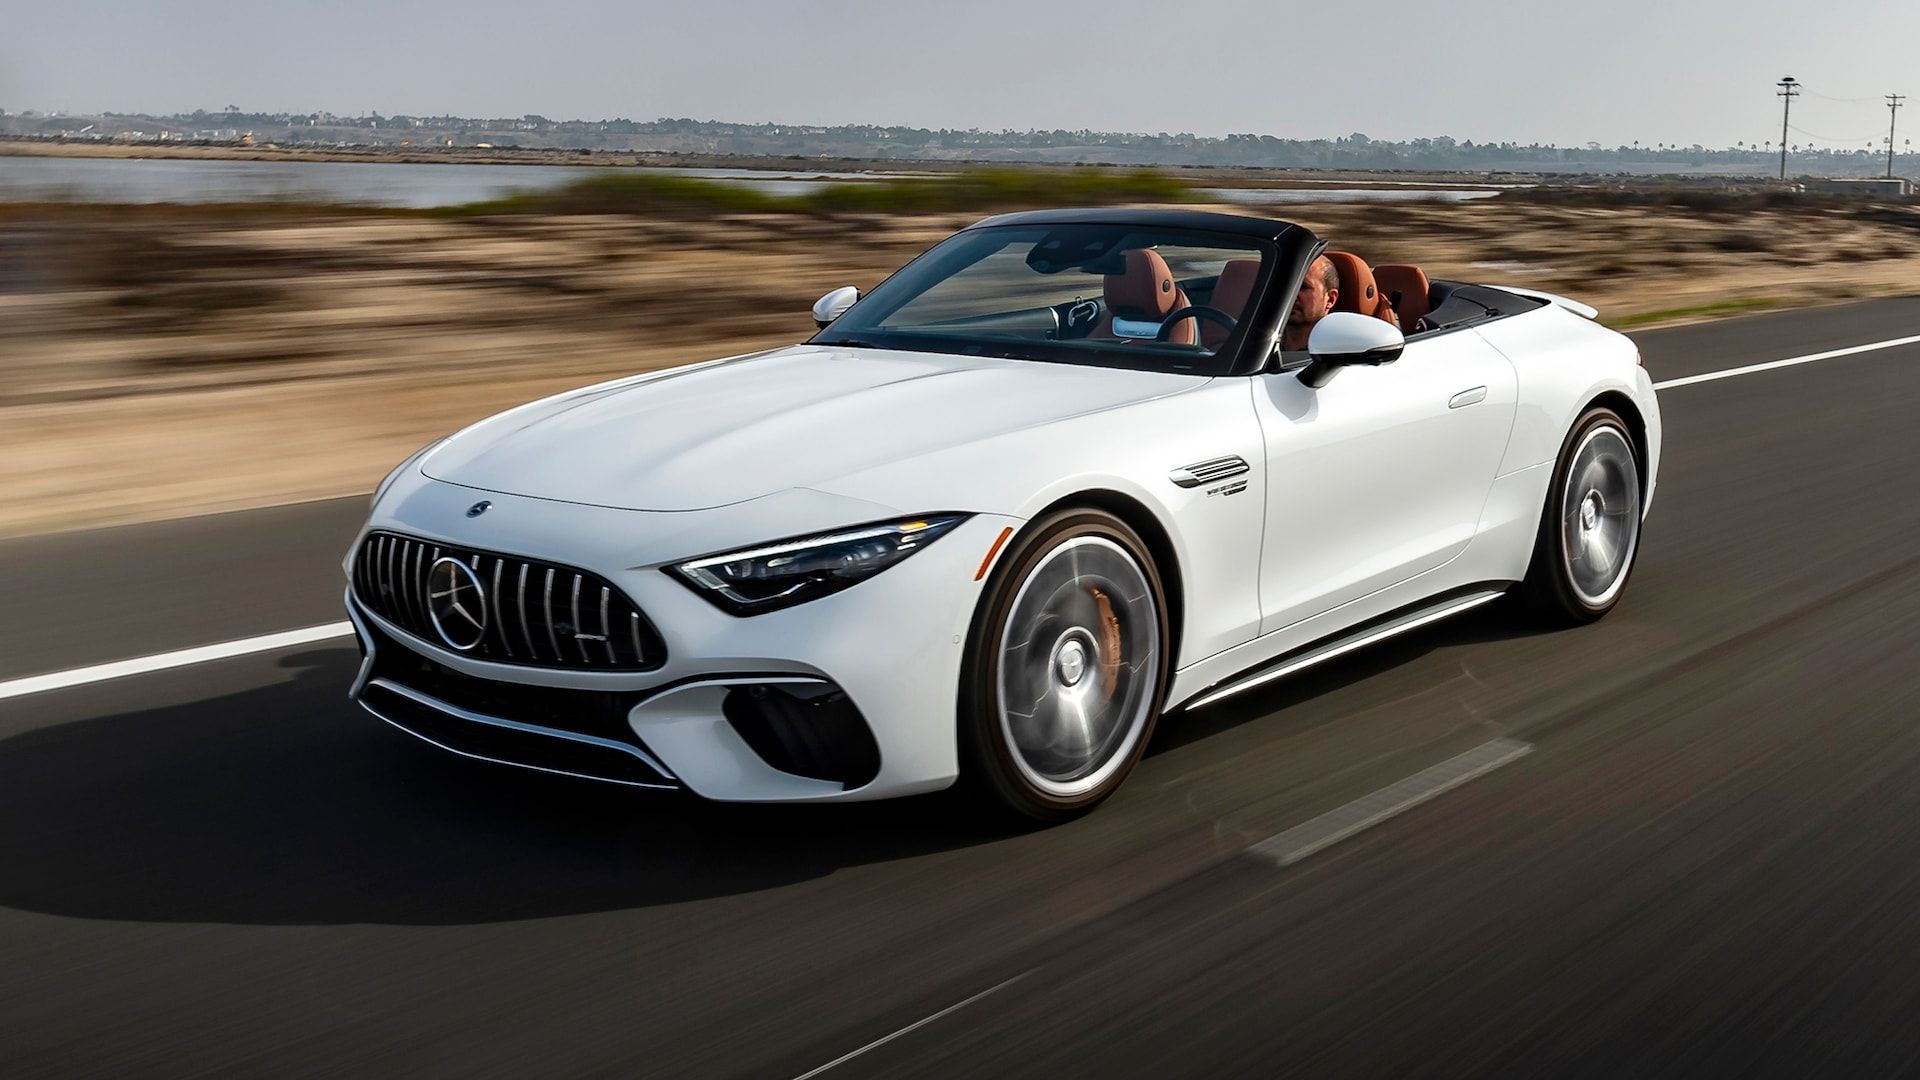 The AMG SL 65 Roadster will make you Nostalgic for the Rugged Masculinity of the 70s